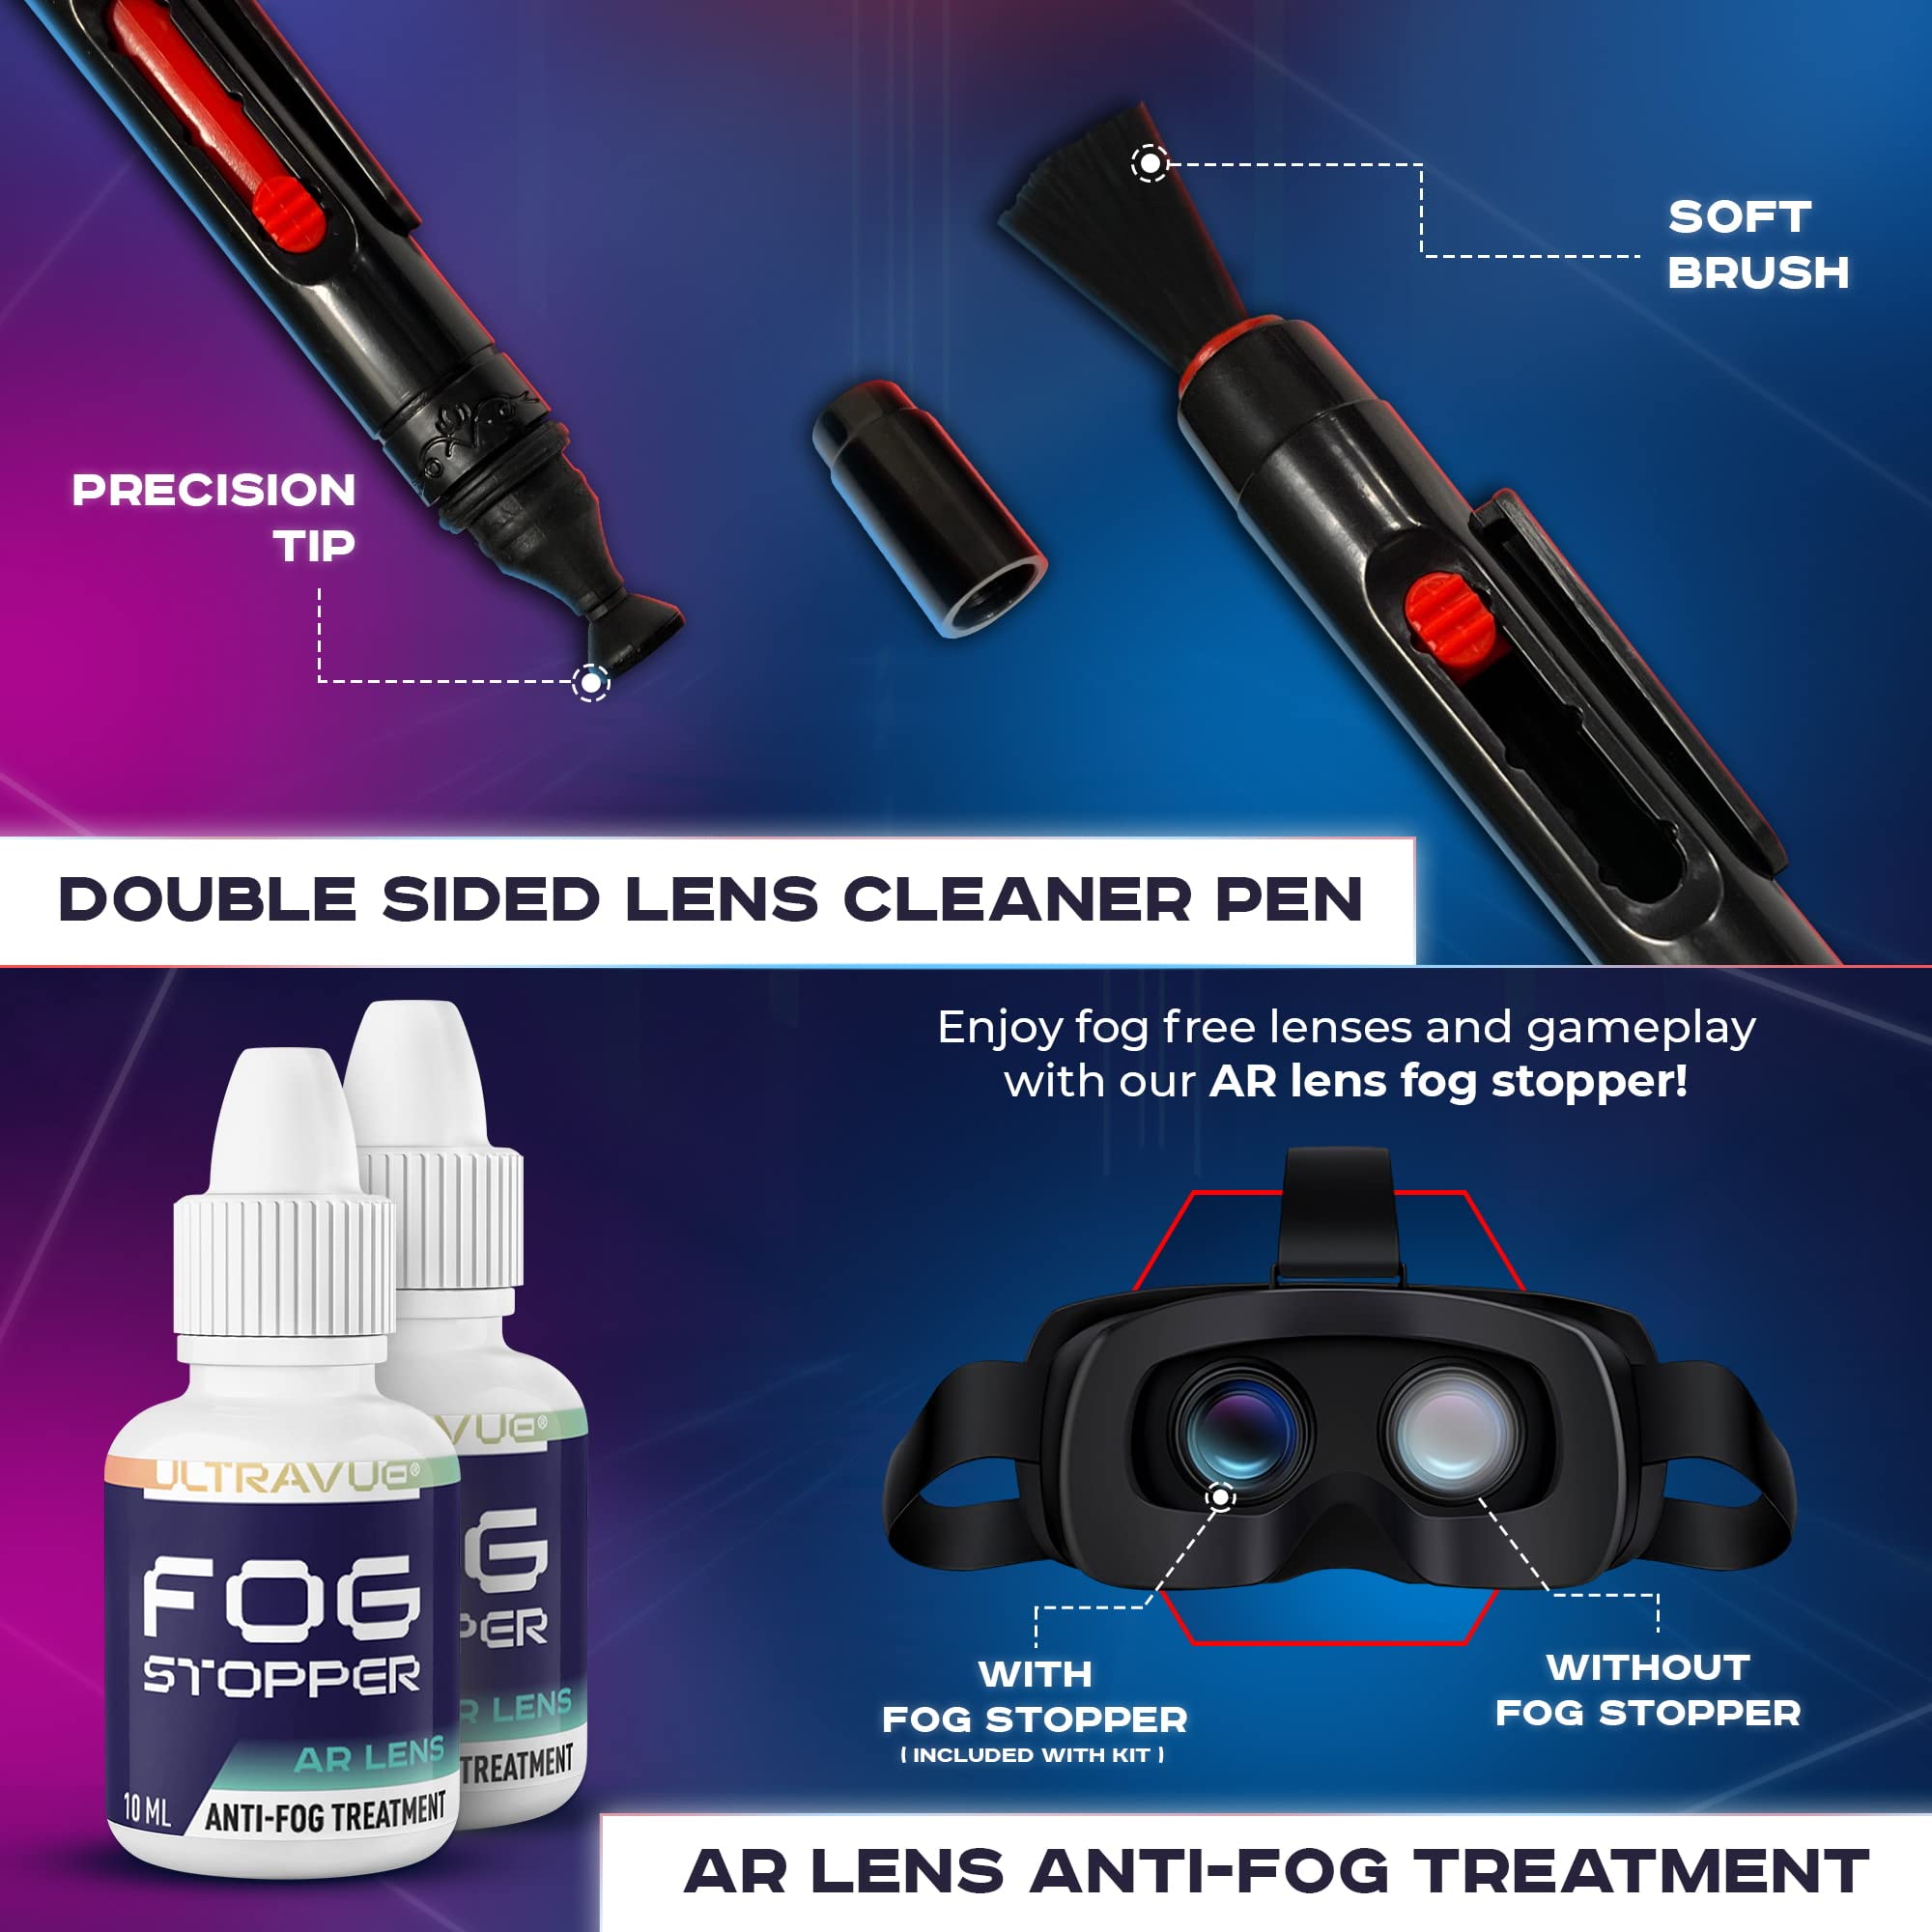 VR Cleaning Kit and Anti-Fog Treatment